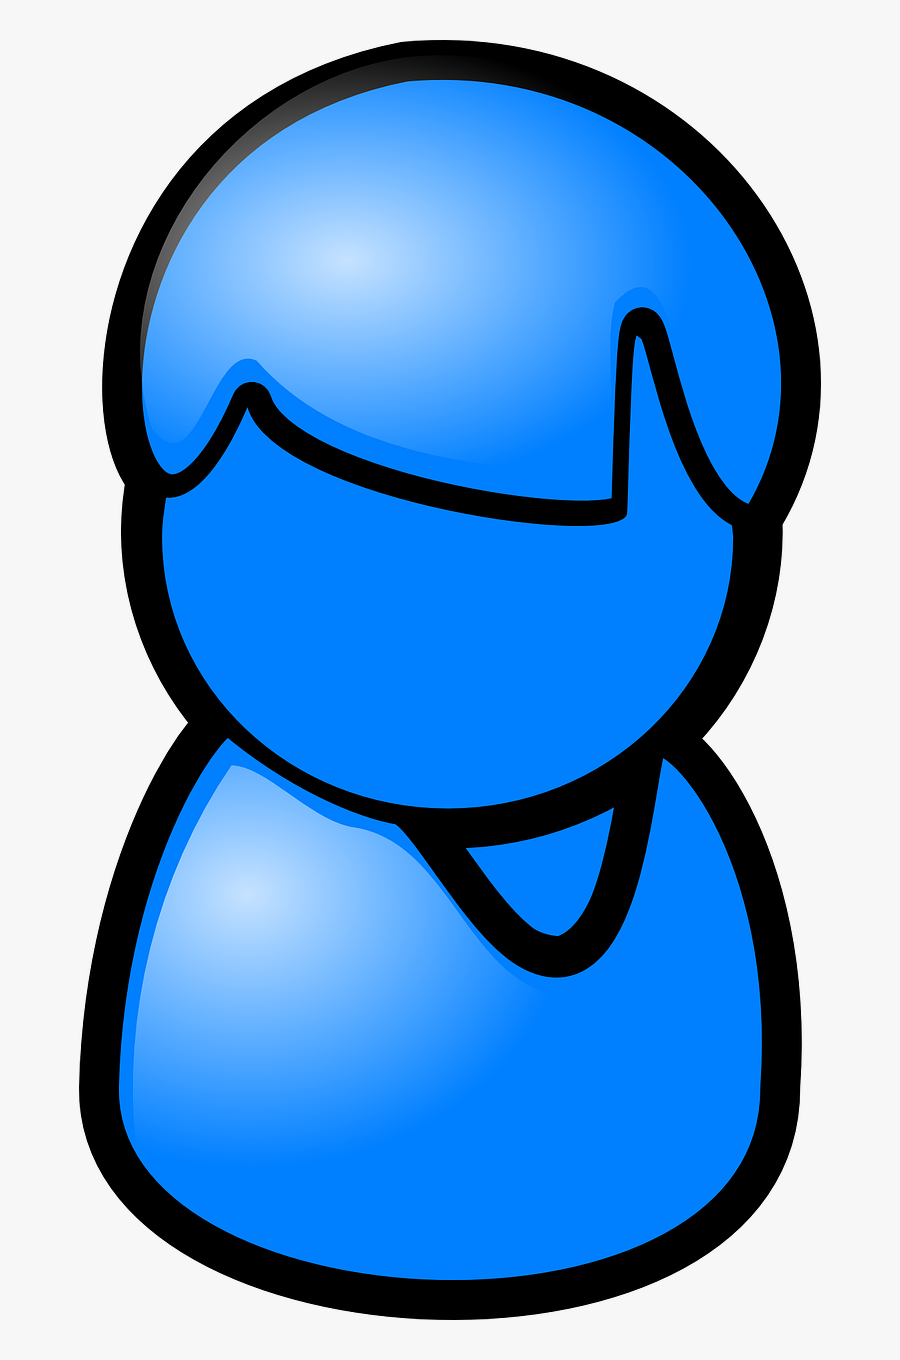 Avatar Person Male Blue Icon Png Image - Portable Network Graphics, Transparent Clipart